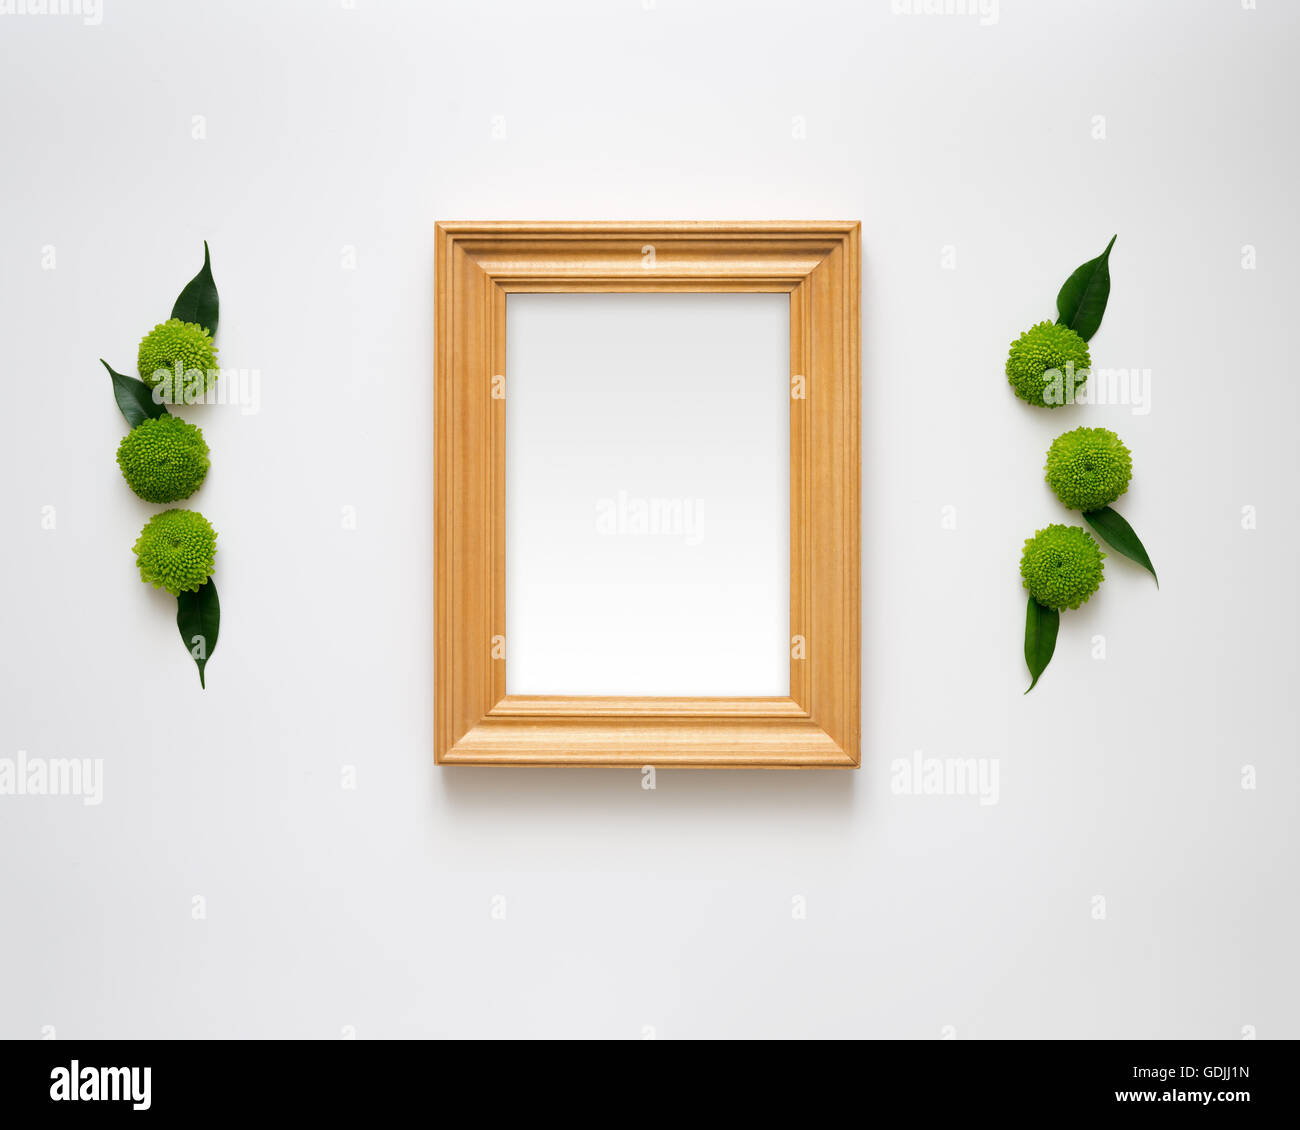 Wooden frame with empty space with decoration of chrysanthemum flowers and ficus leaves on white background. Overhead view. Flat Stock Photo